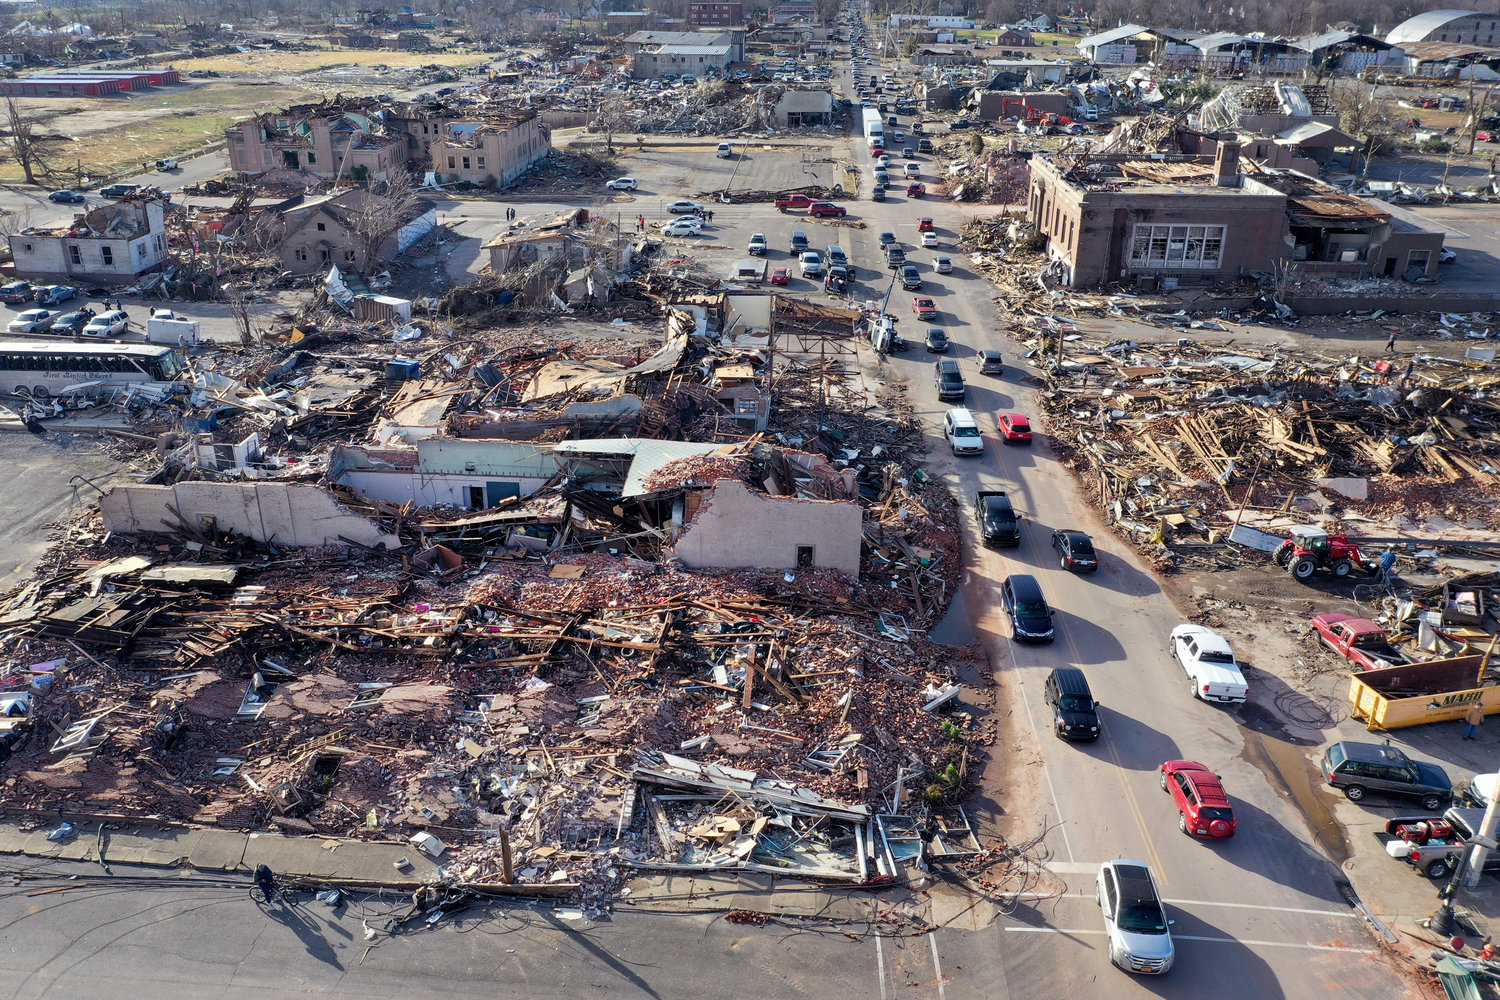 In an aerial view, homes and businesses are destroyed after a tornado ripped through town the previous evening on Saturday, Dec. 11, 2021, in Mayfield, Kentucky. (Scott Olson/Getty Images/TNS)